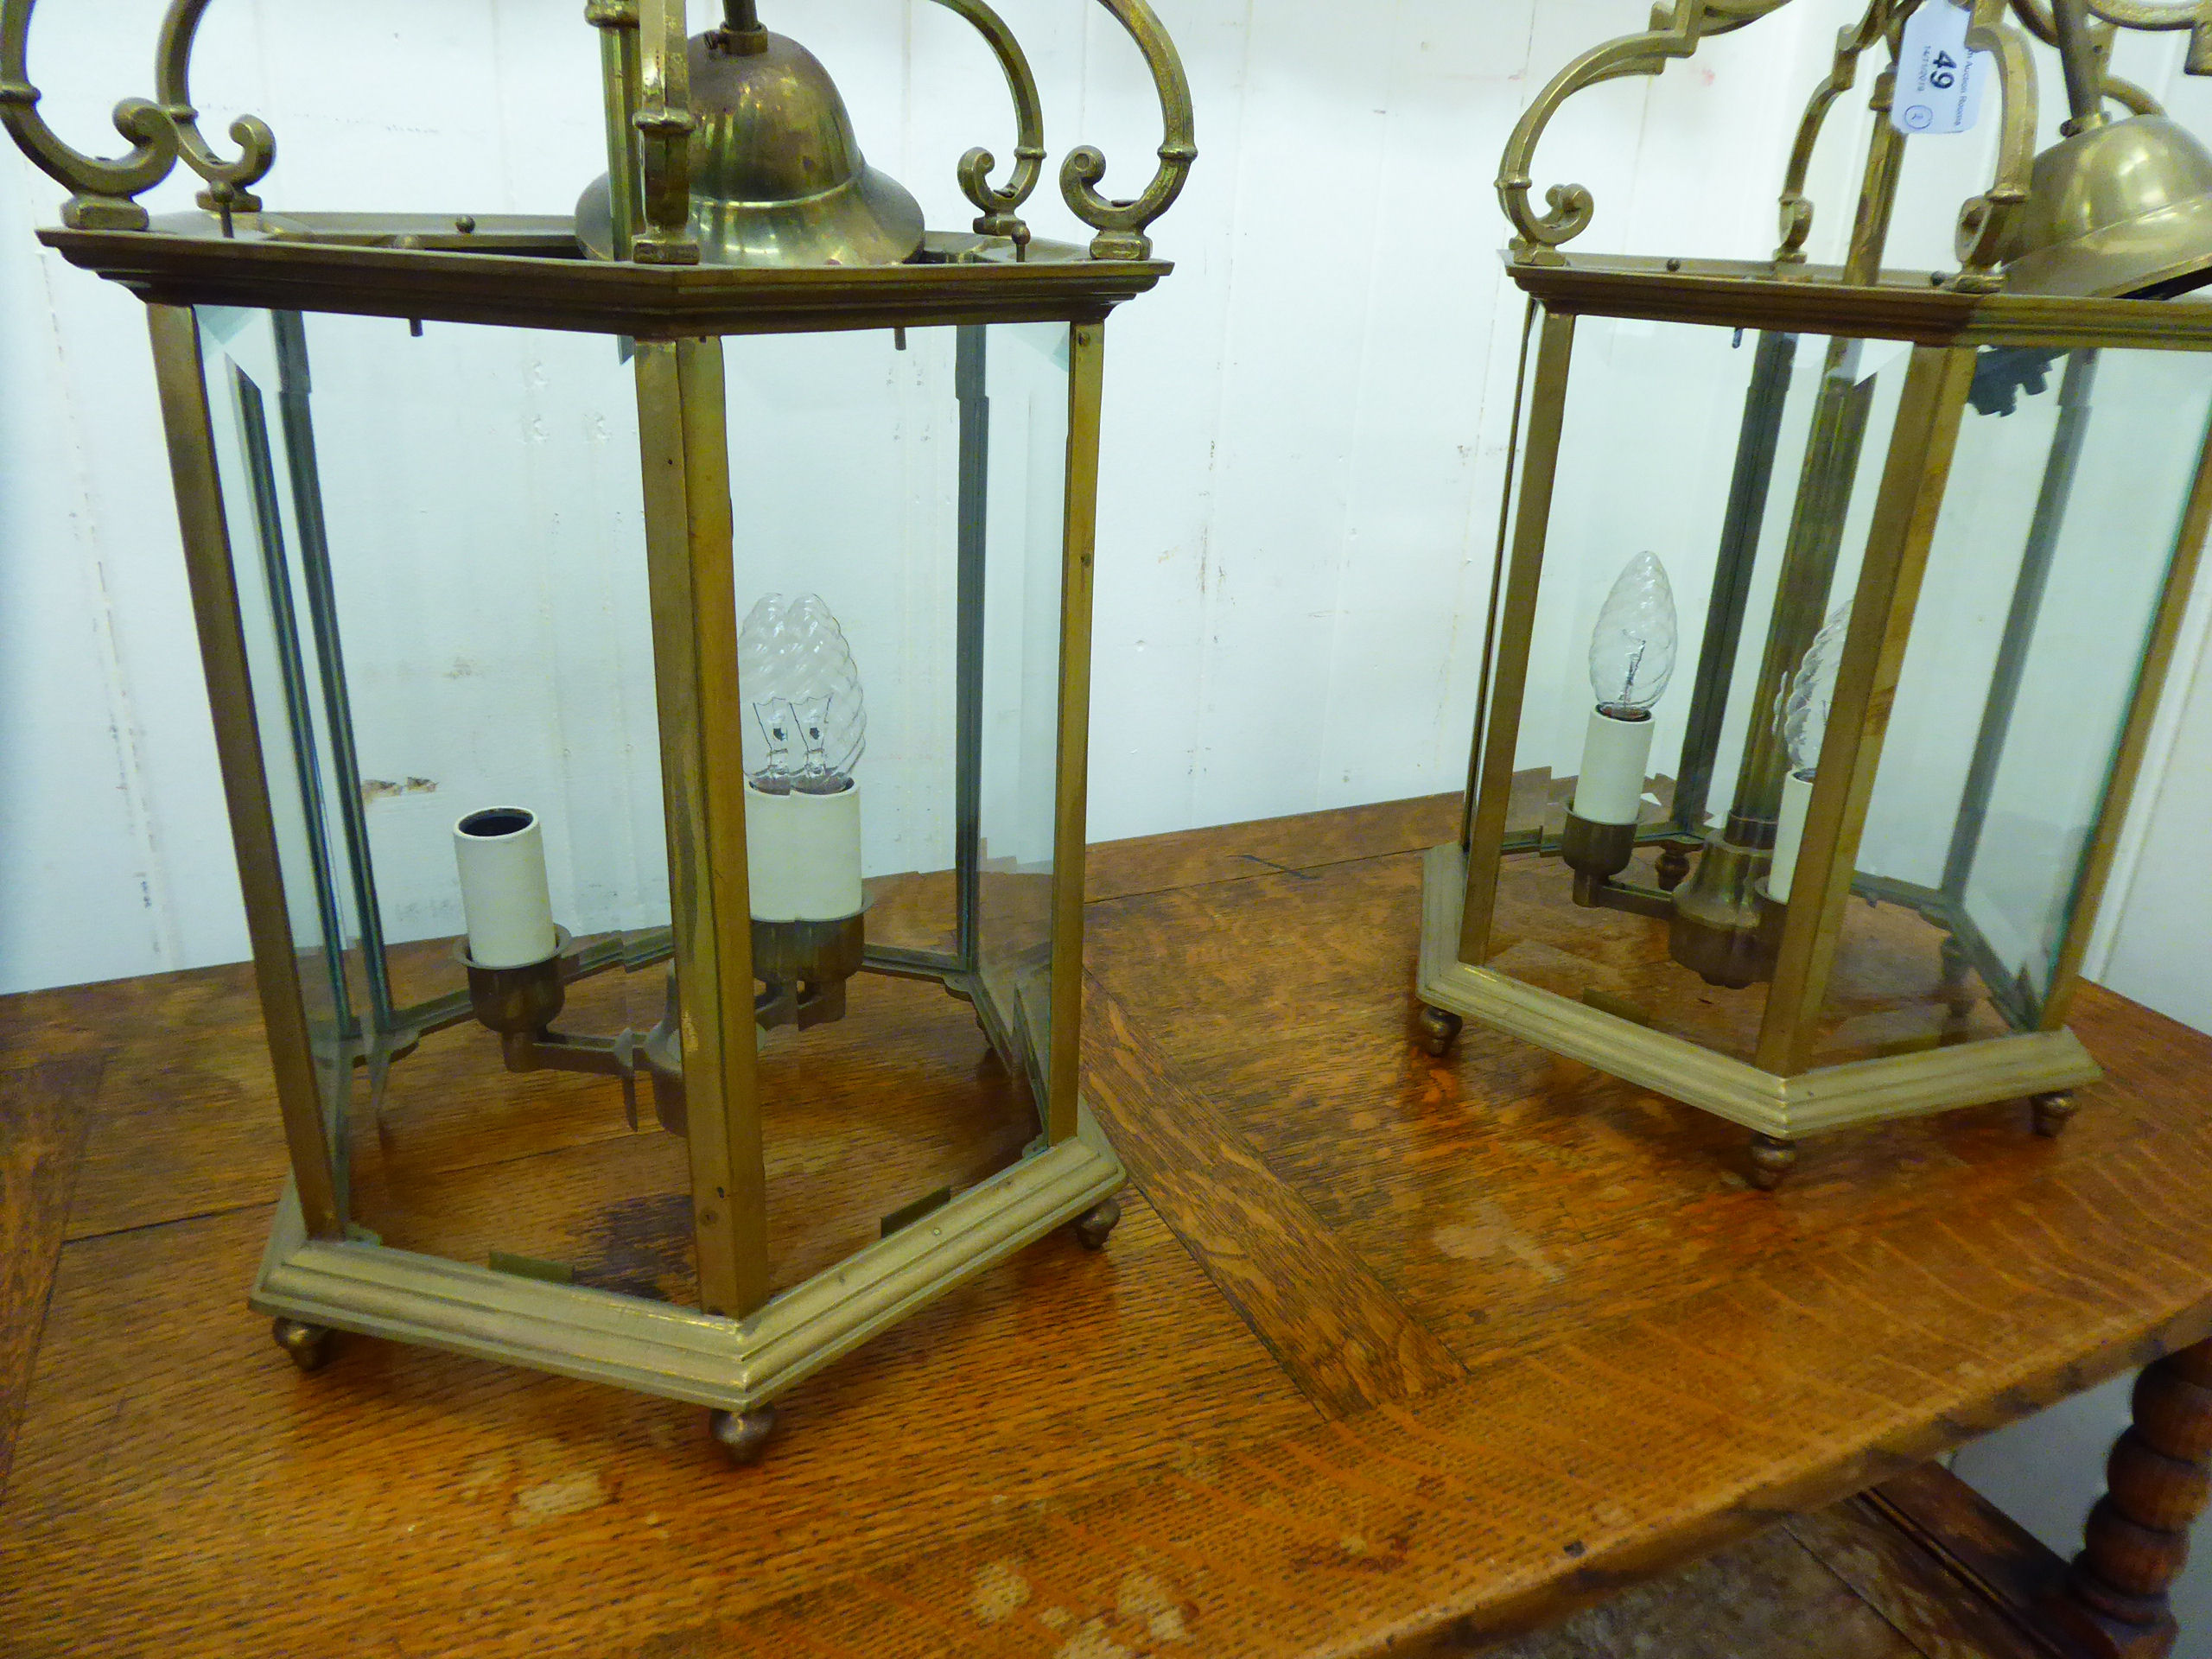 A pair of modern Georgian style lacquered brass framed hexagonal hanging lanterns with glass panels - Image 3 of 3